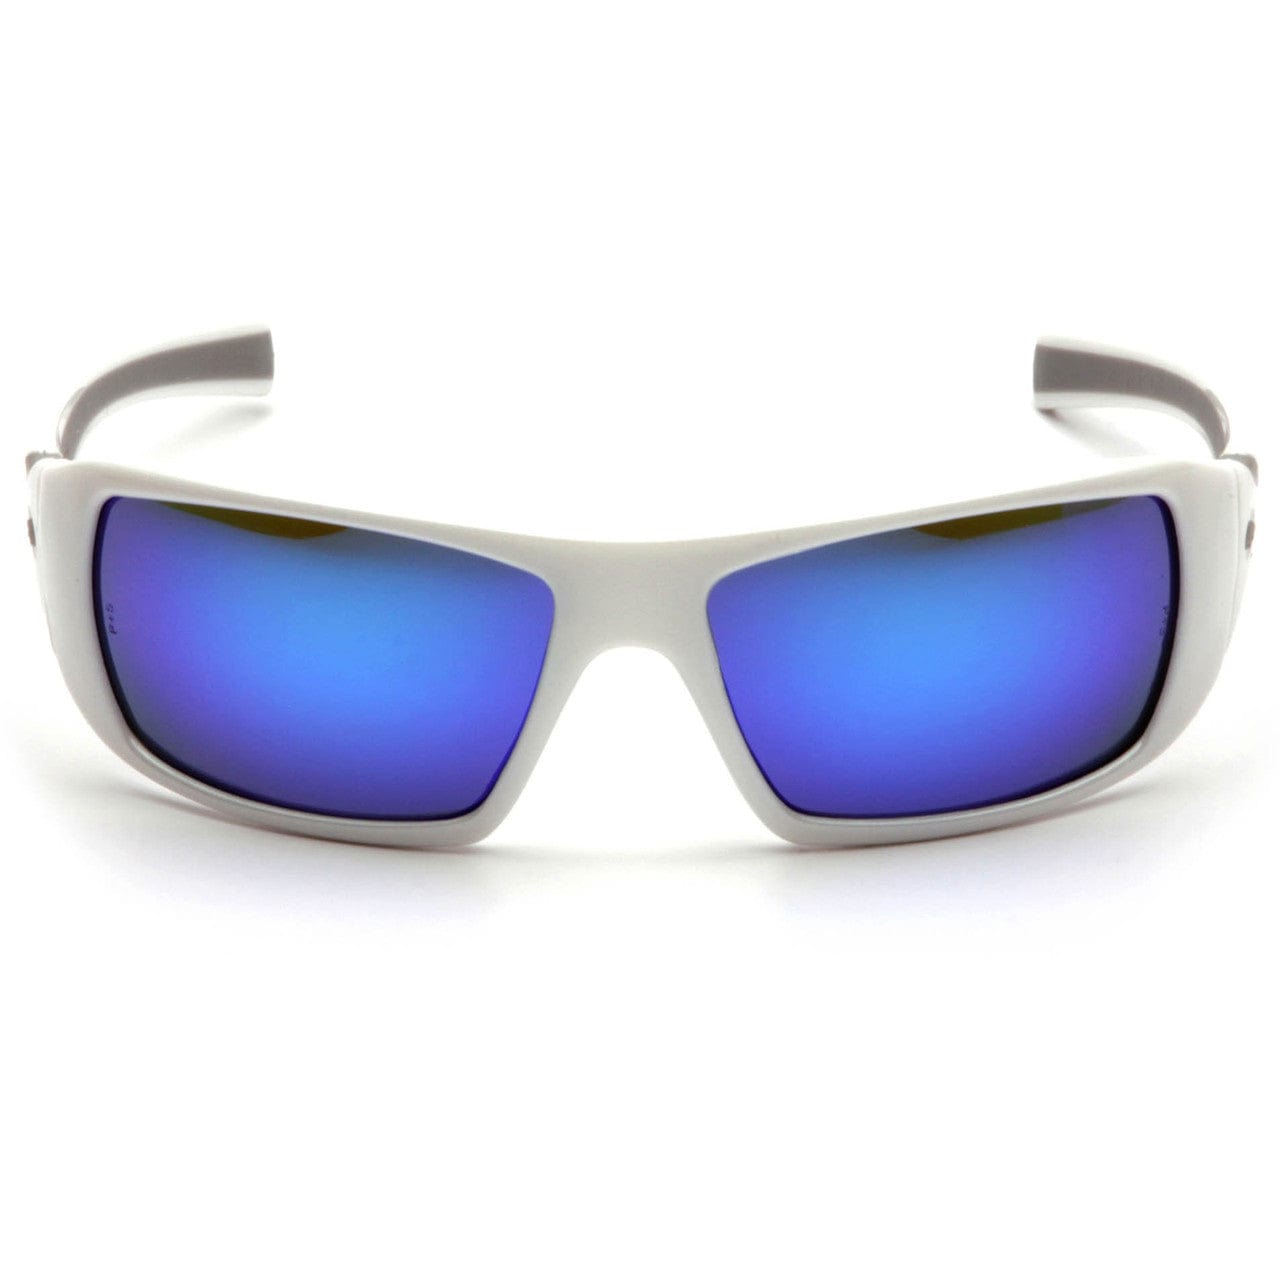 Pyramex Goliath Safety Glasses with Pearl White Frame and Ice Blue Mirror Lens SW5665D Front View